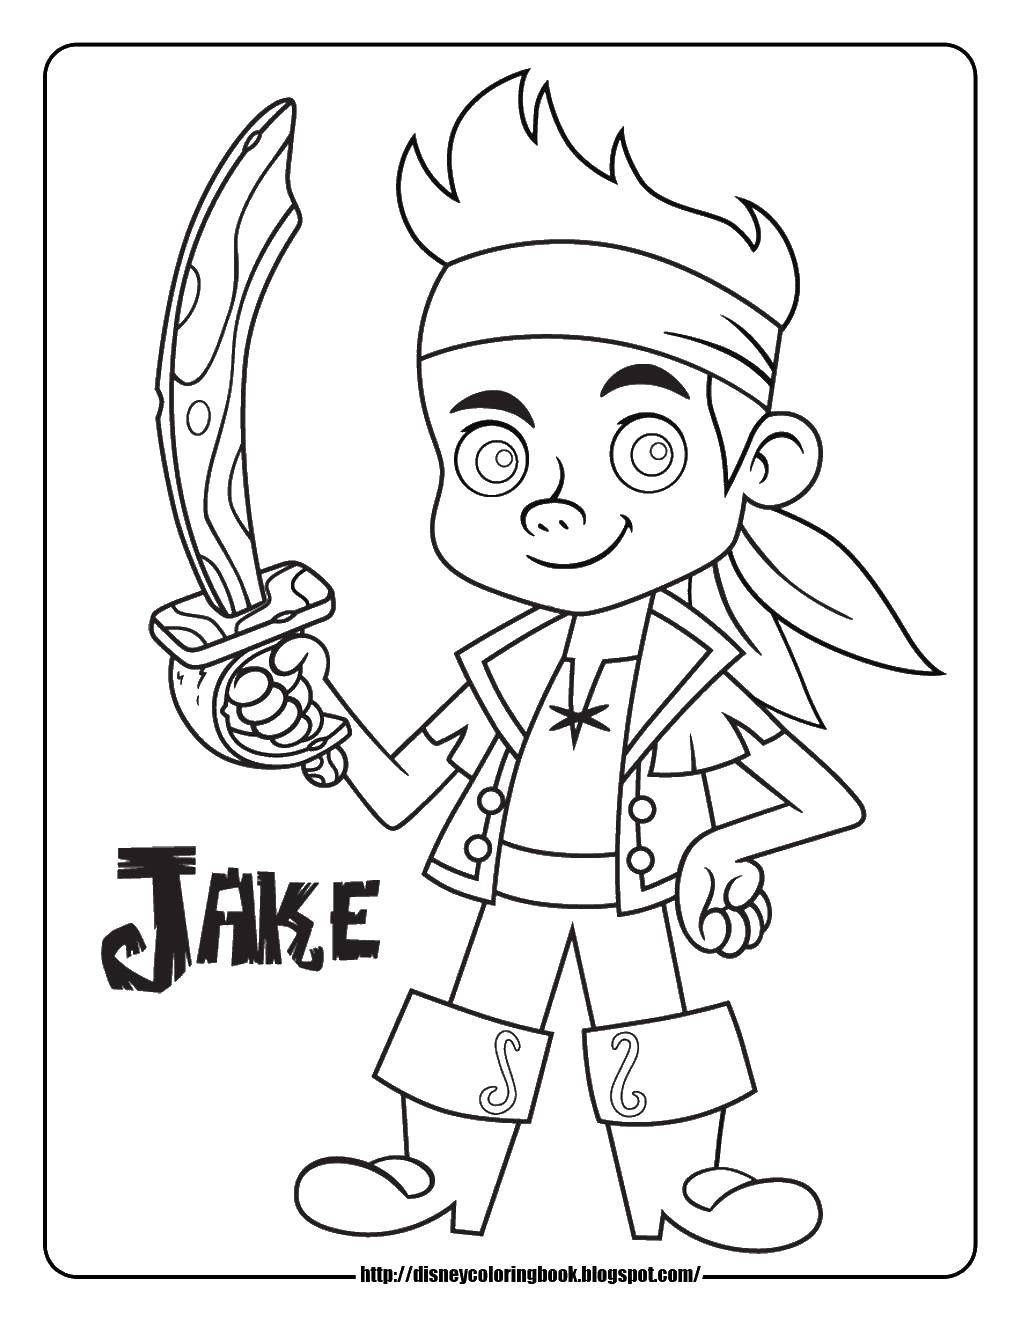 Coloring Jake. Category The pirates. Tags:  pirates, children, Jake.